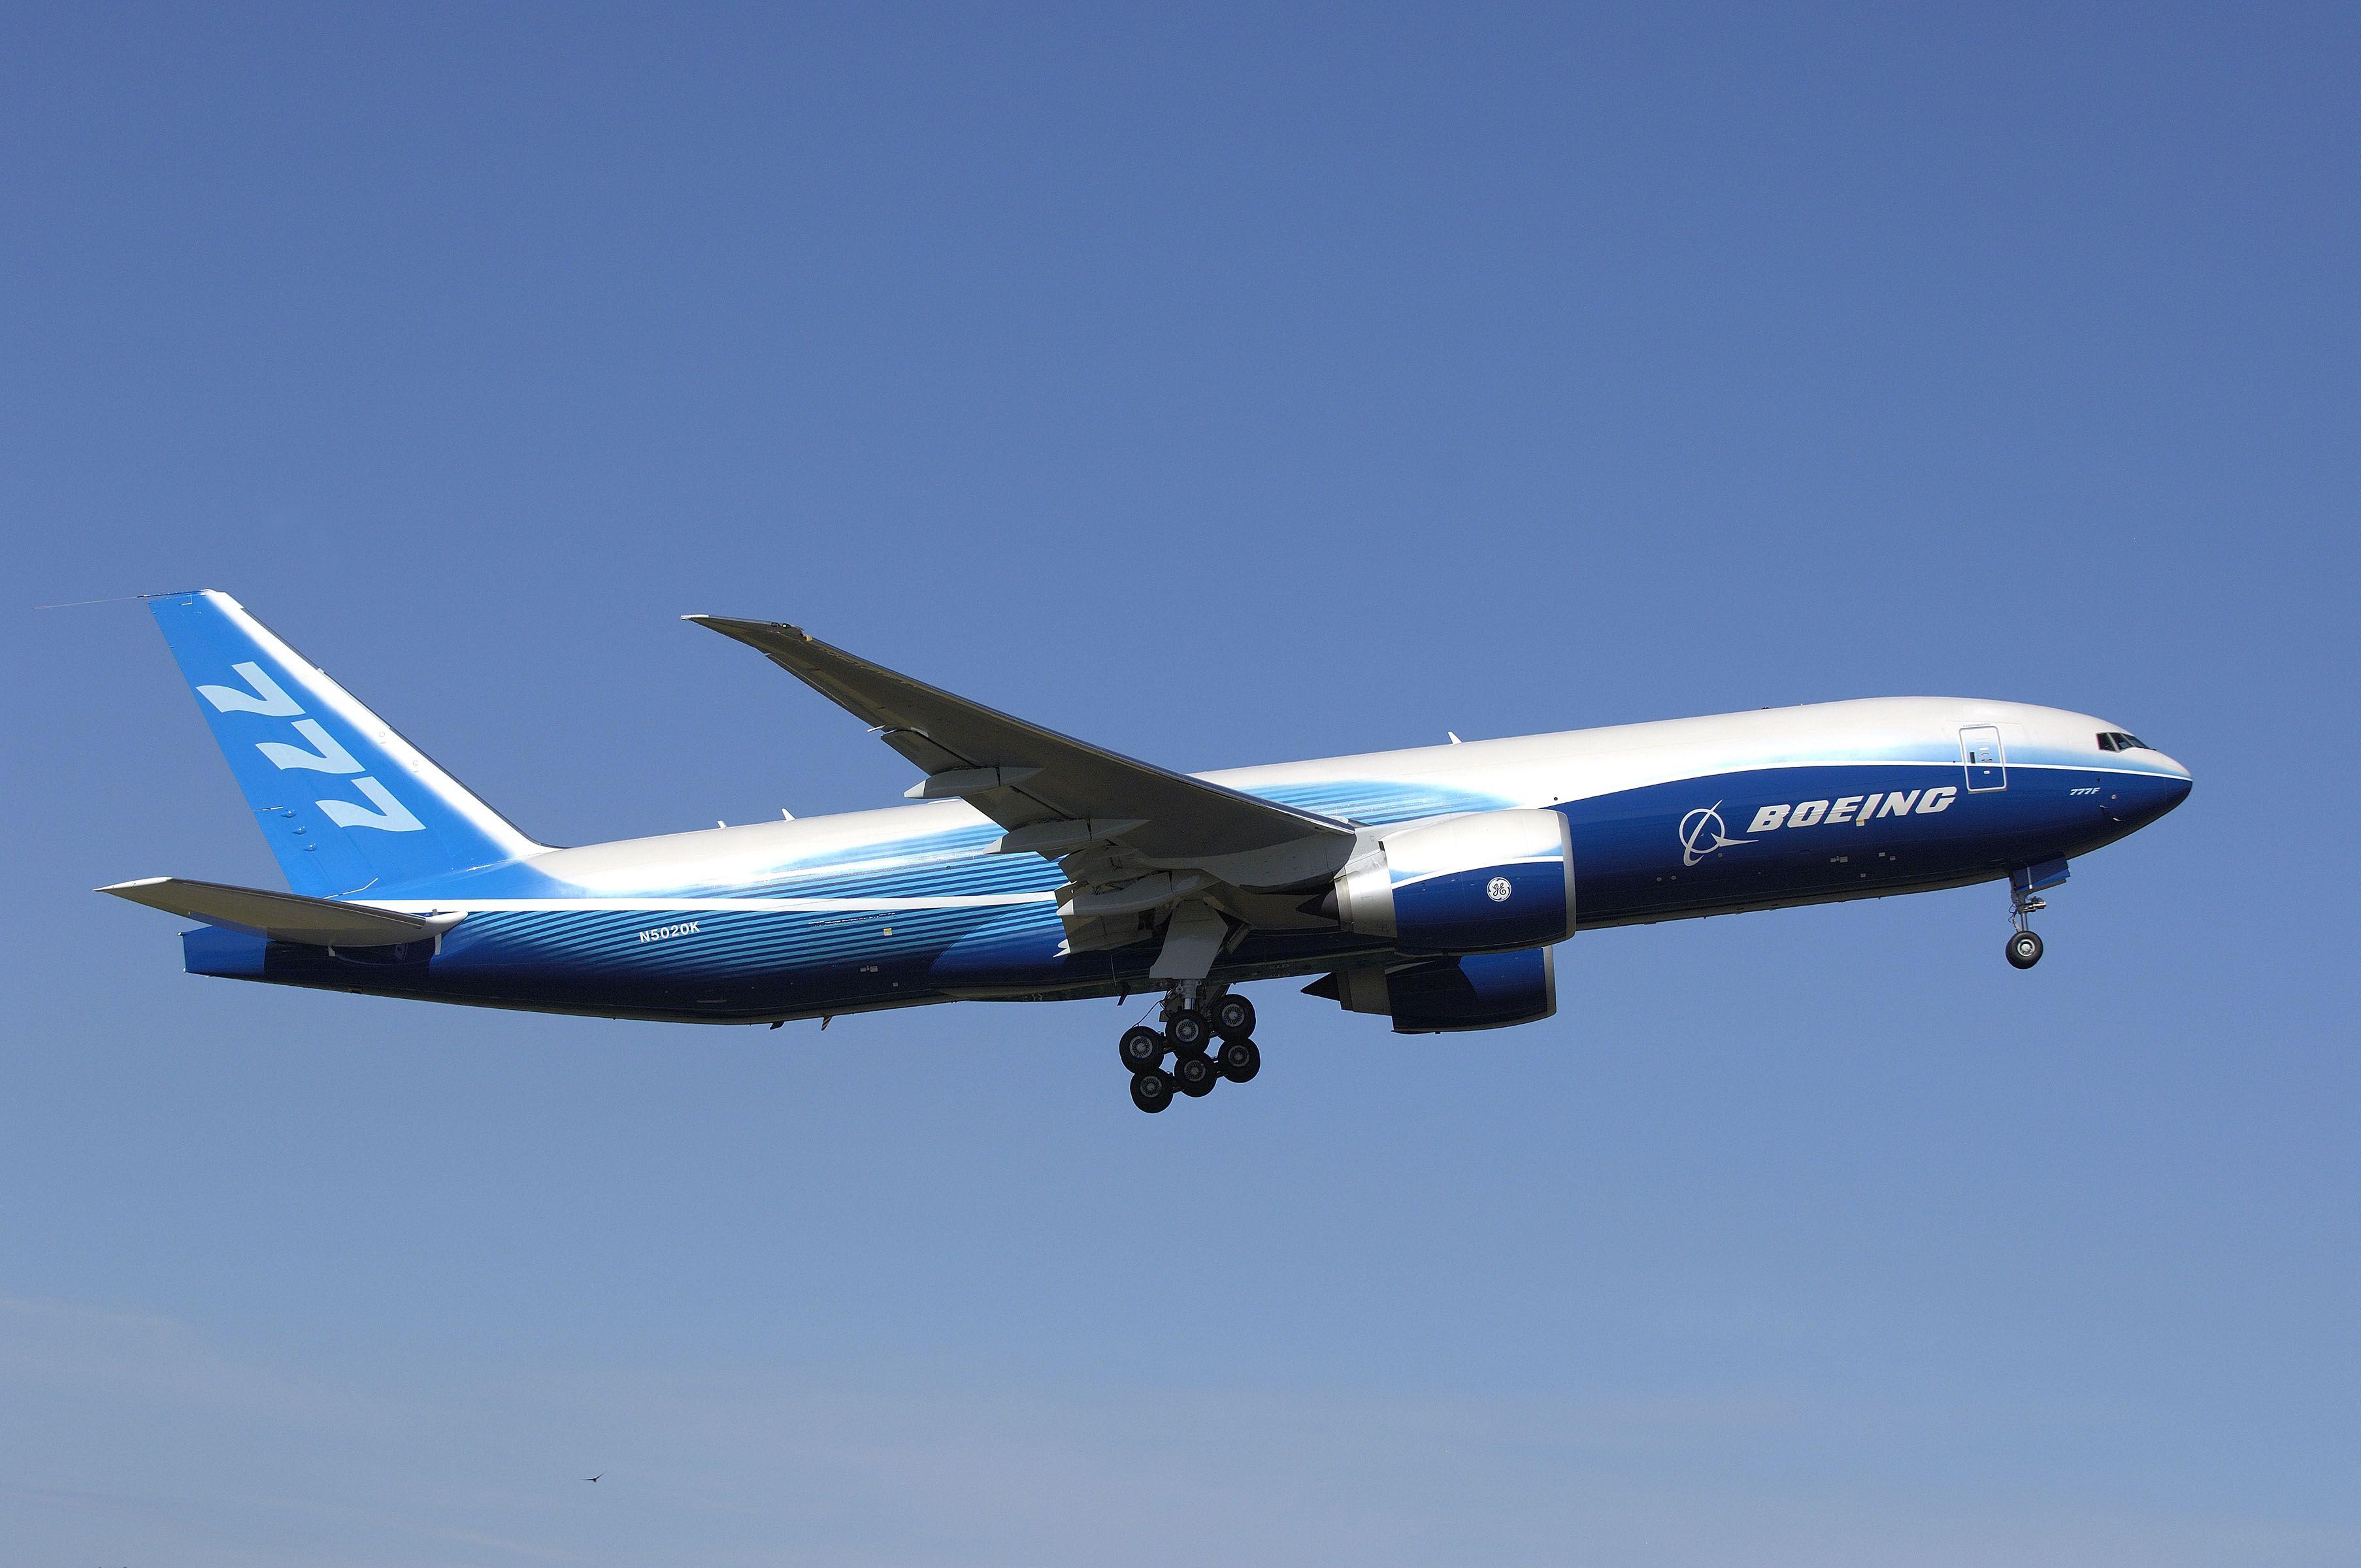 BOEING 777 airliner aircraft airplane plane jet (35) wallpaper